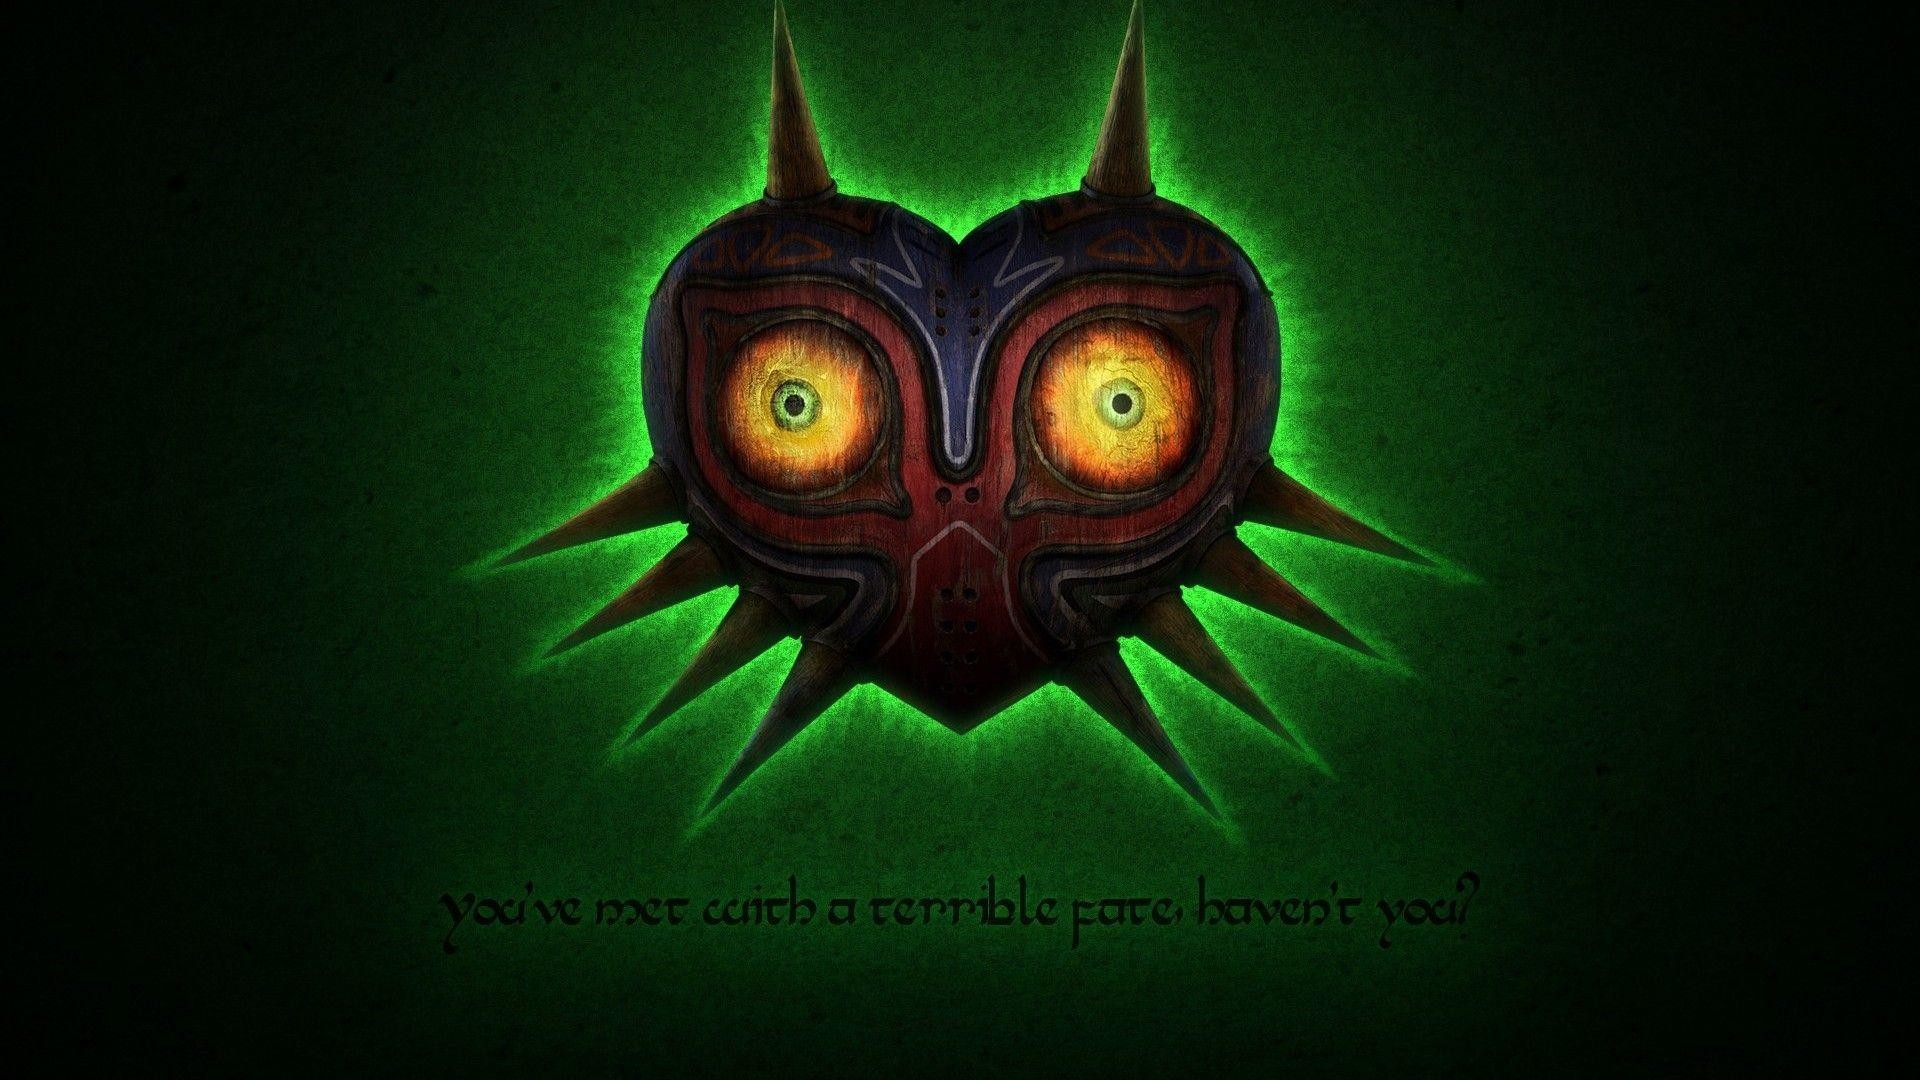 1920x1080 Majoras Mask Skull Kid Tattoo 83 I Just Made This Pictures